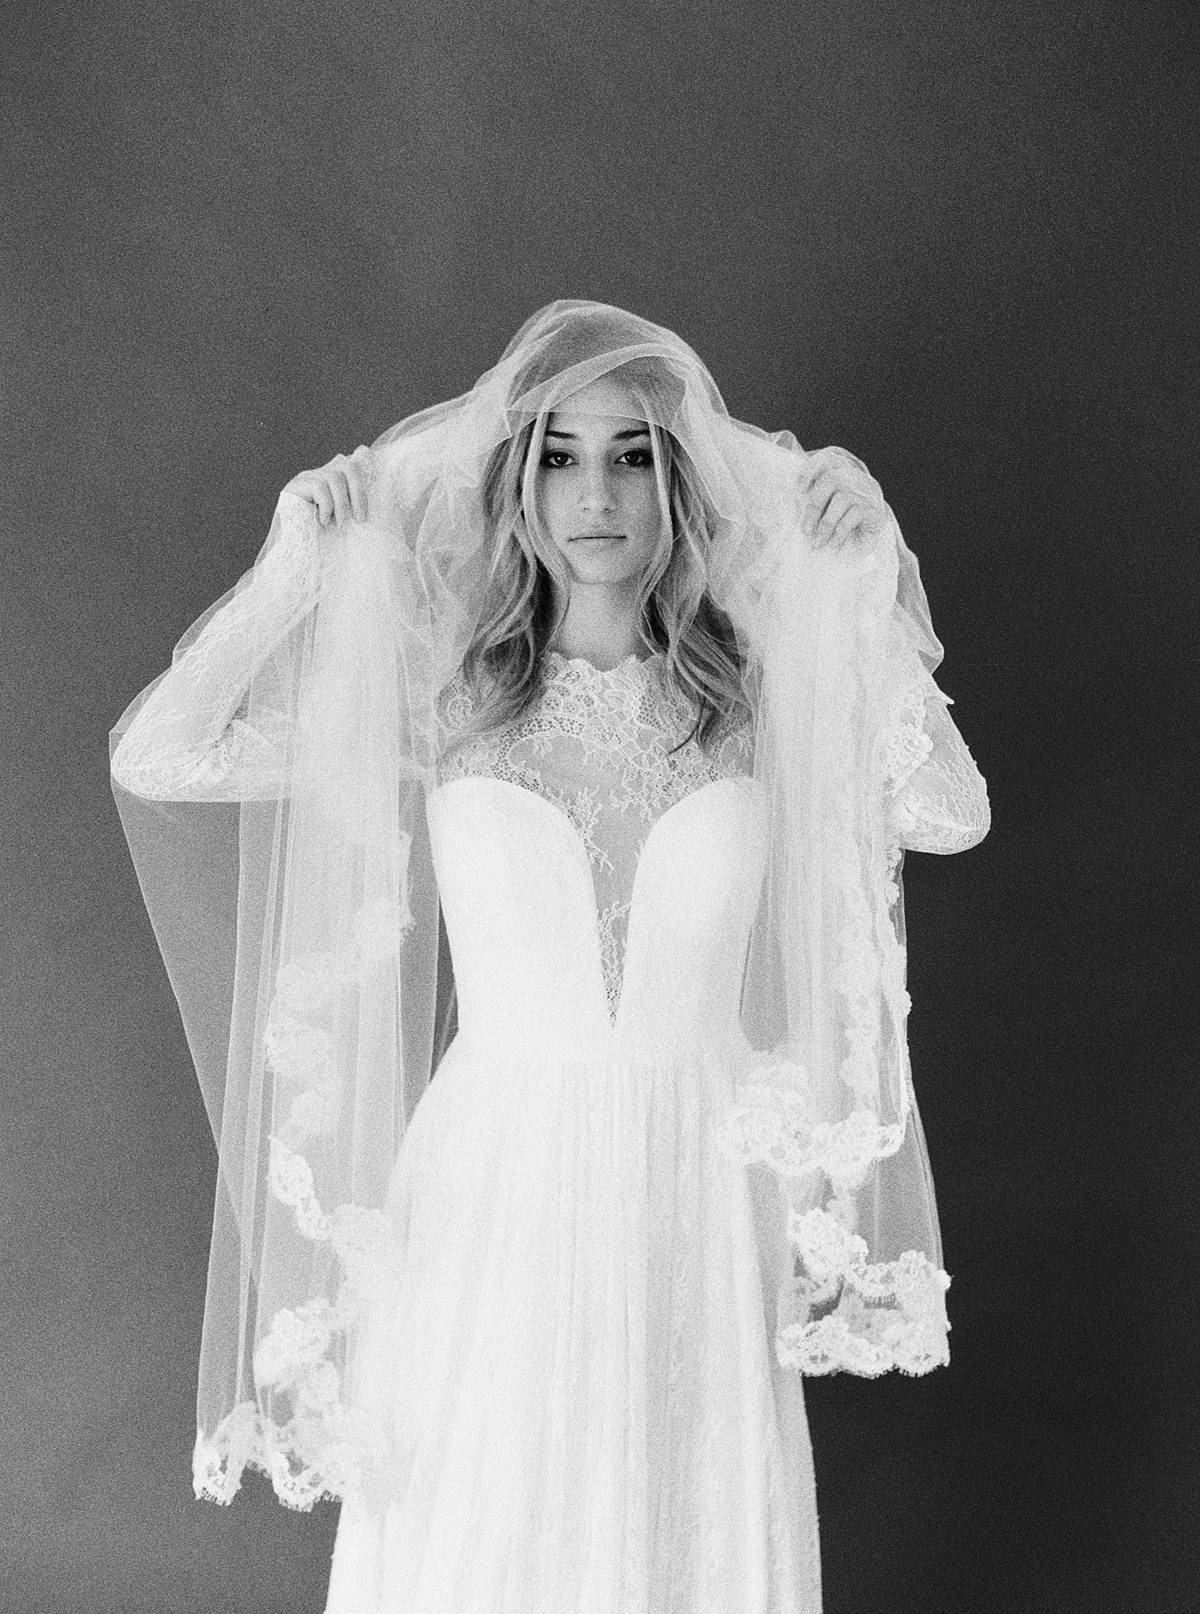 studio bridal portrait in charleston sc by brian d smith photography on ilford delta 3200 medium format film with lace veil overhead